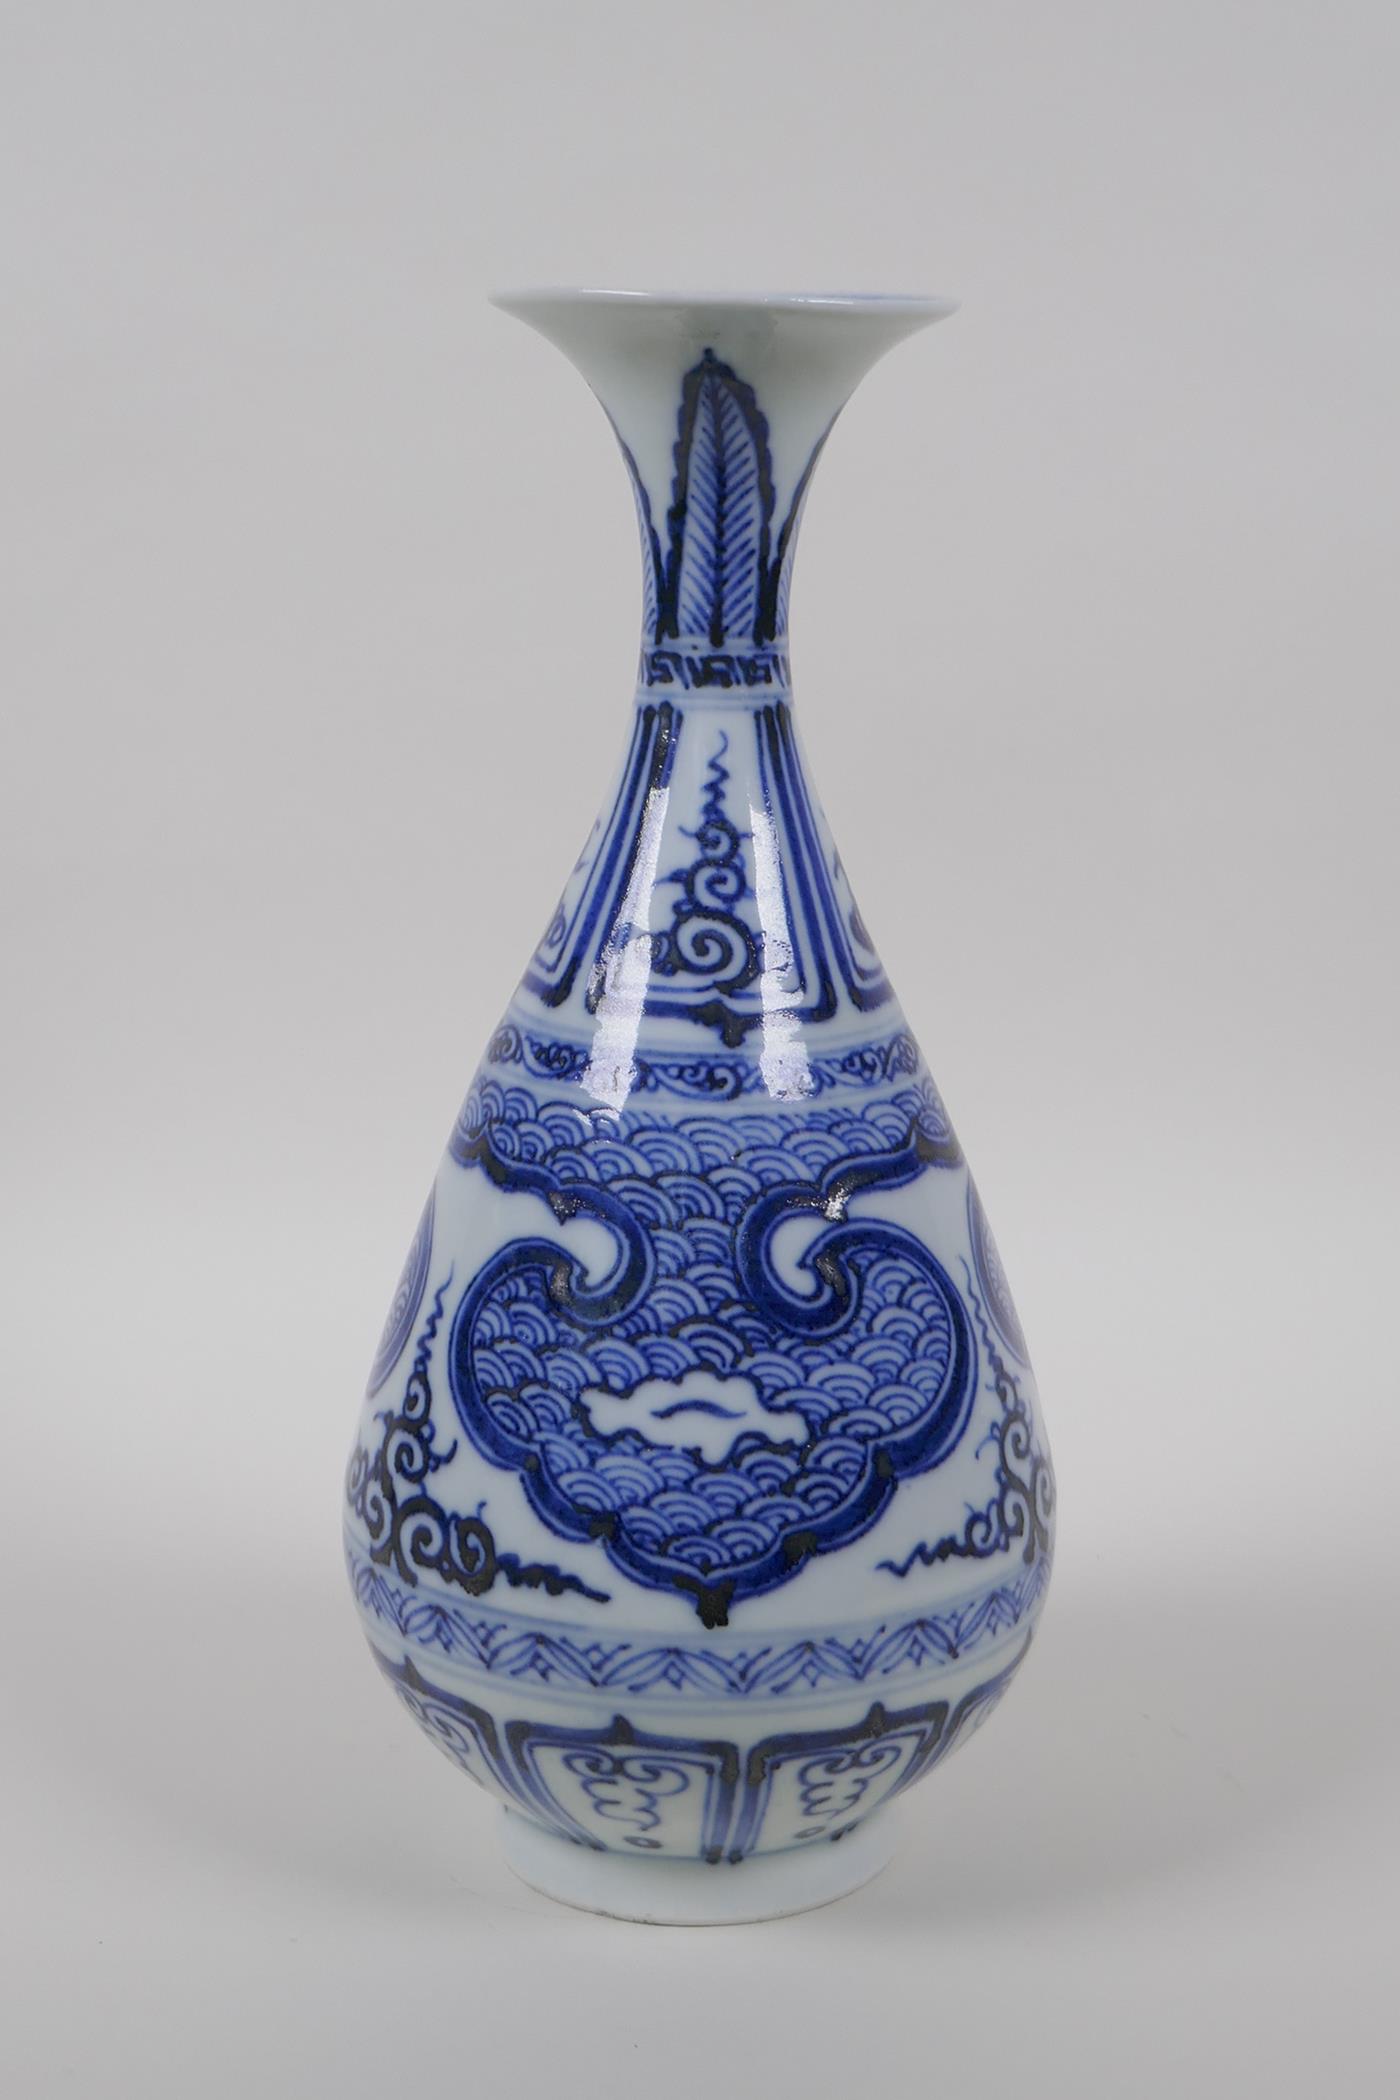 A Chinese early C20th blue and white porcelain pear shaped vase with archaic style decoration, - Image 3 of 4